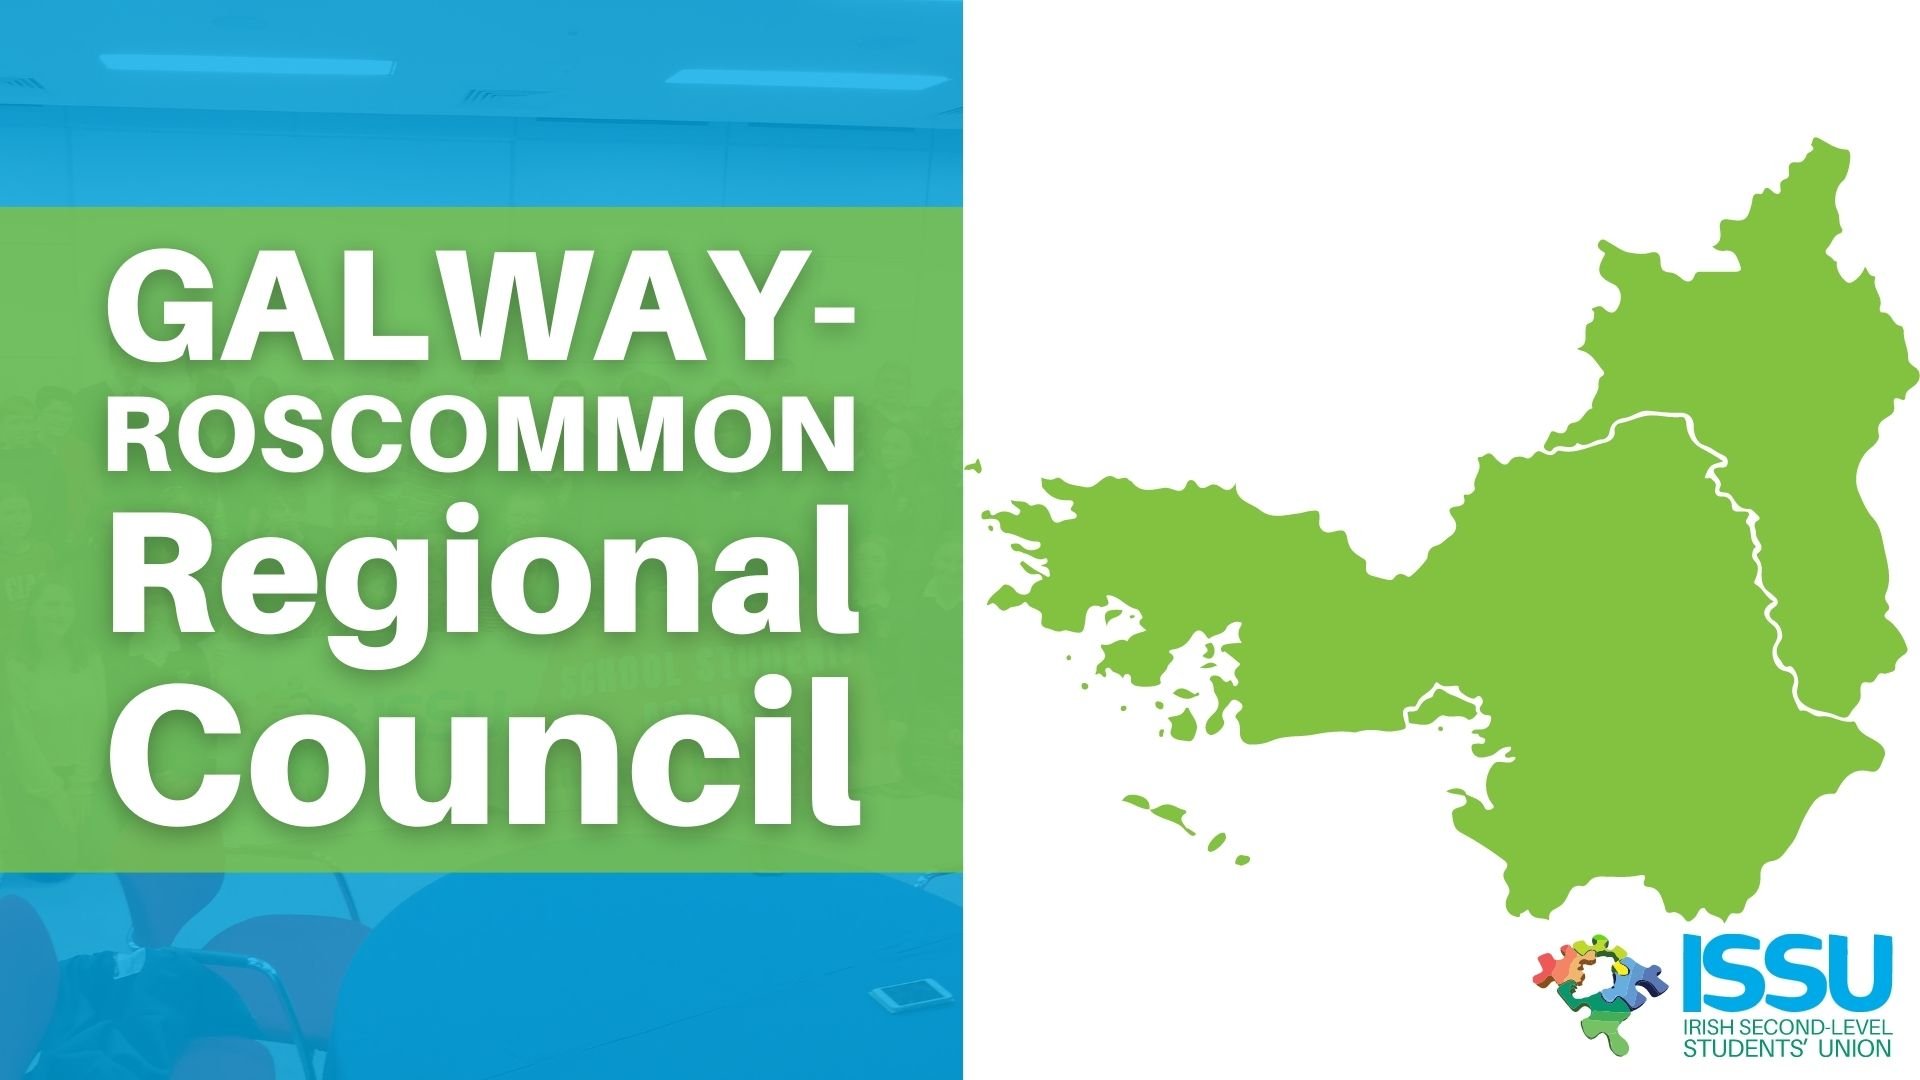 Galway - Roscommon Regional Council.jpg